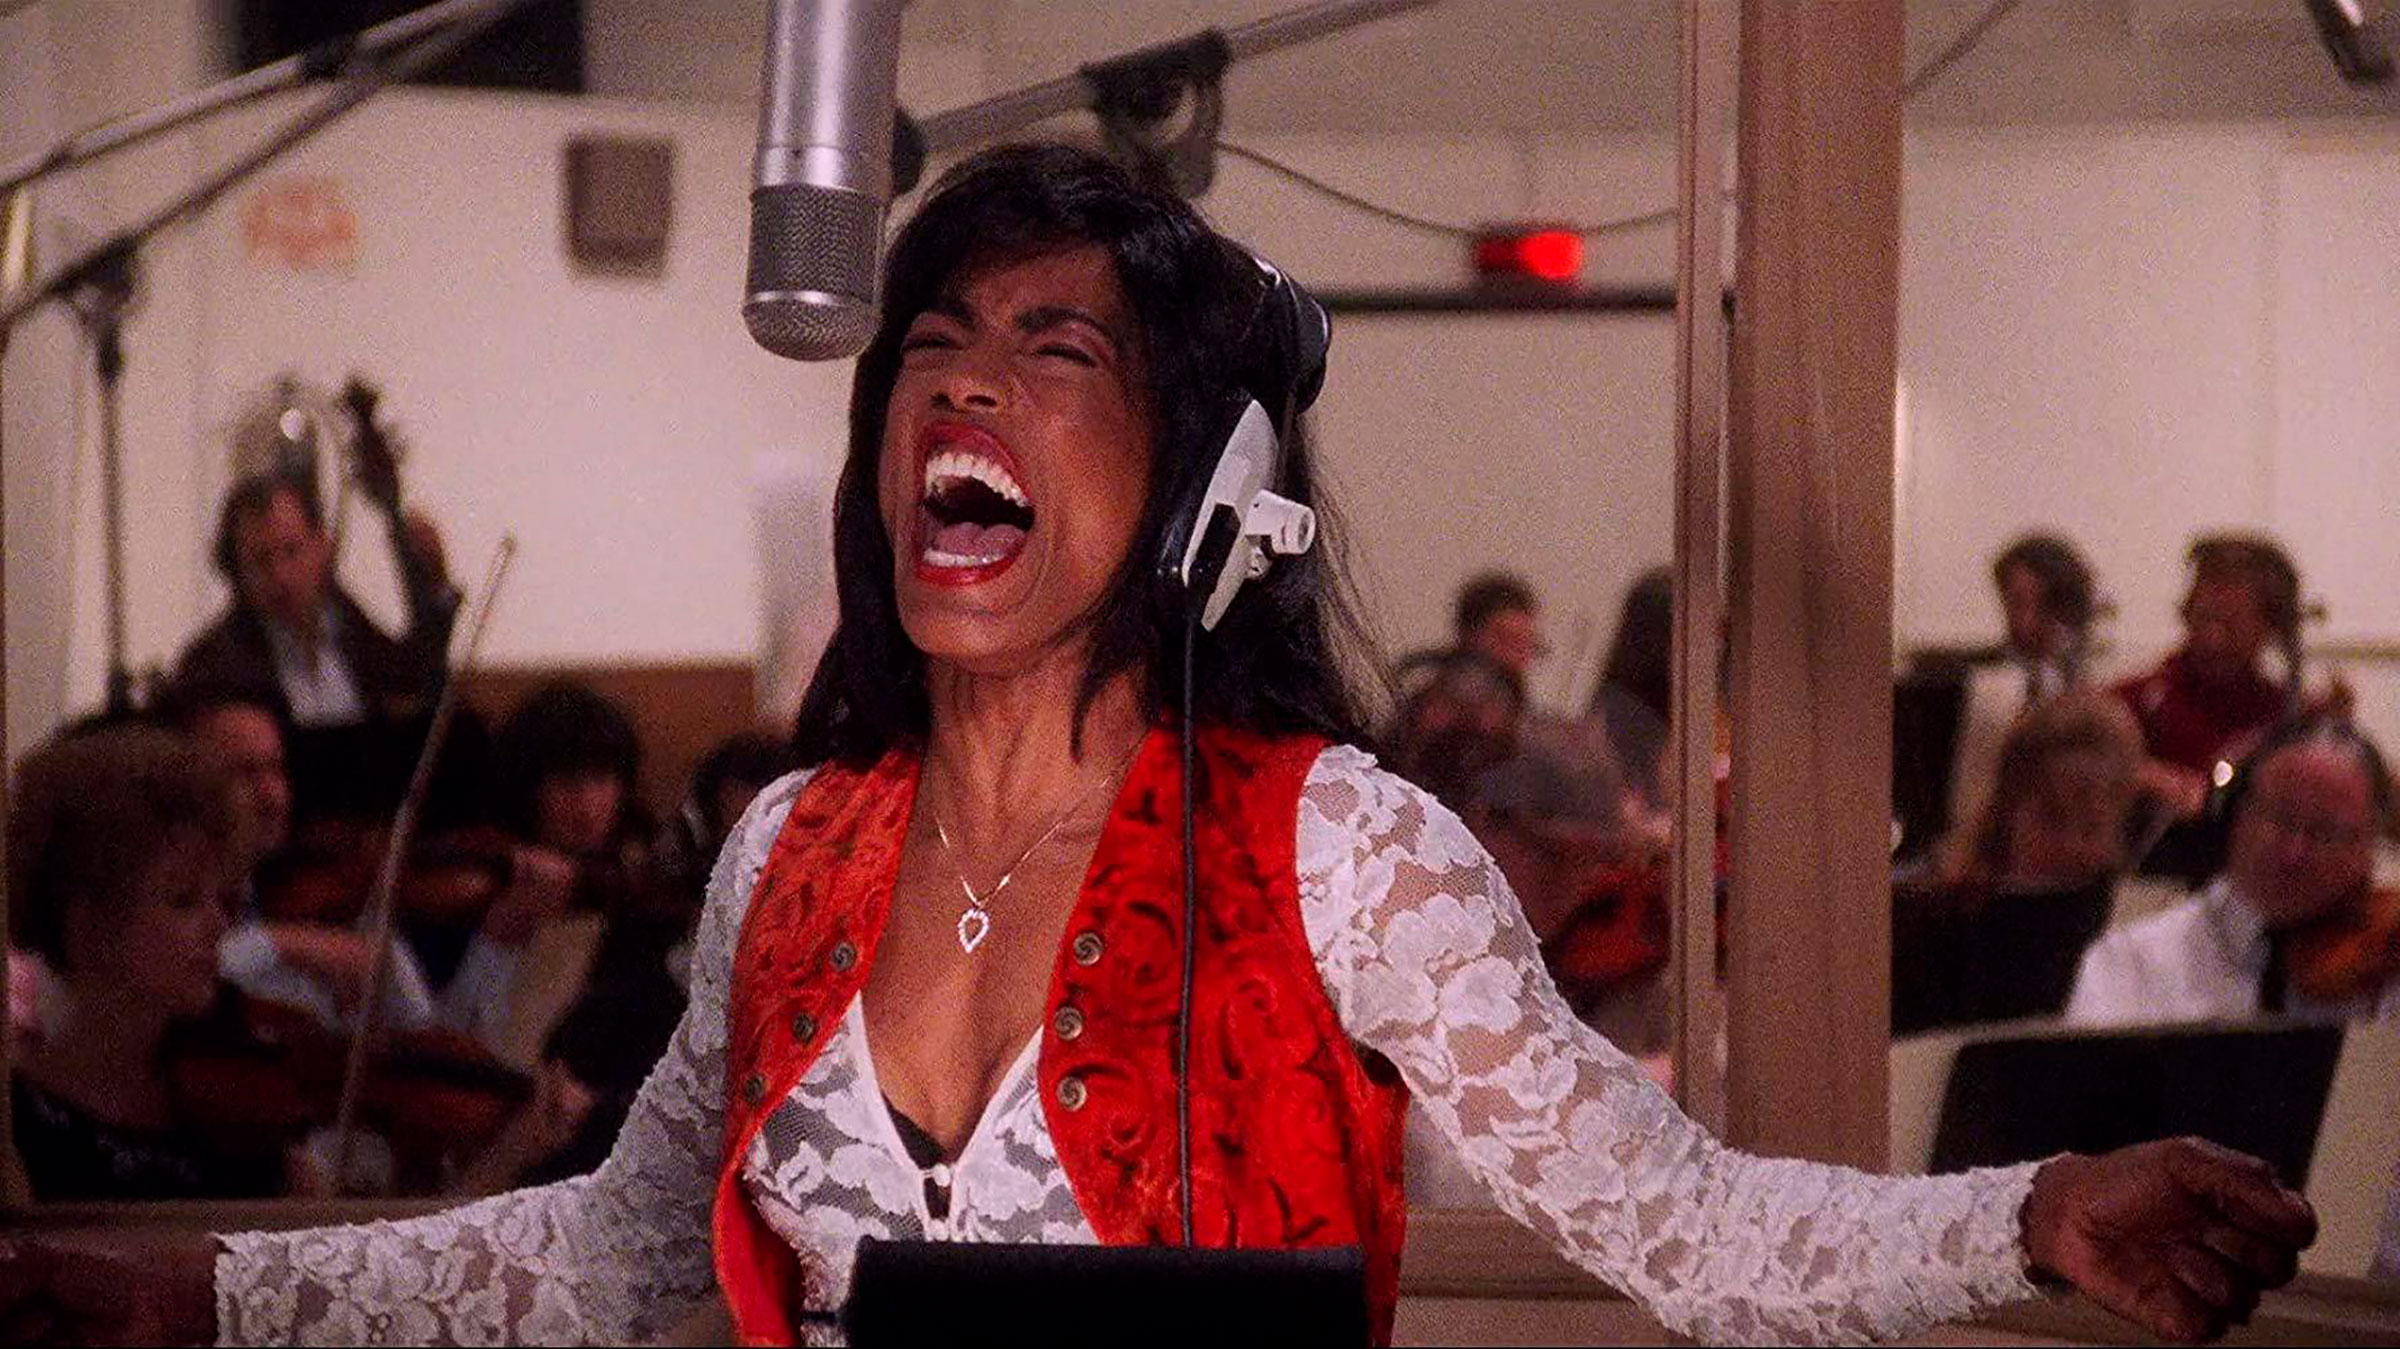 Angela Bassett in 'What's Love Got to Do With It'